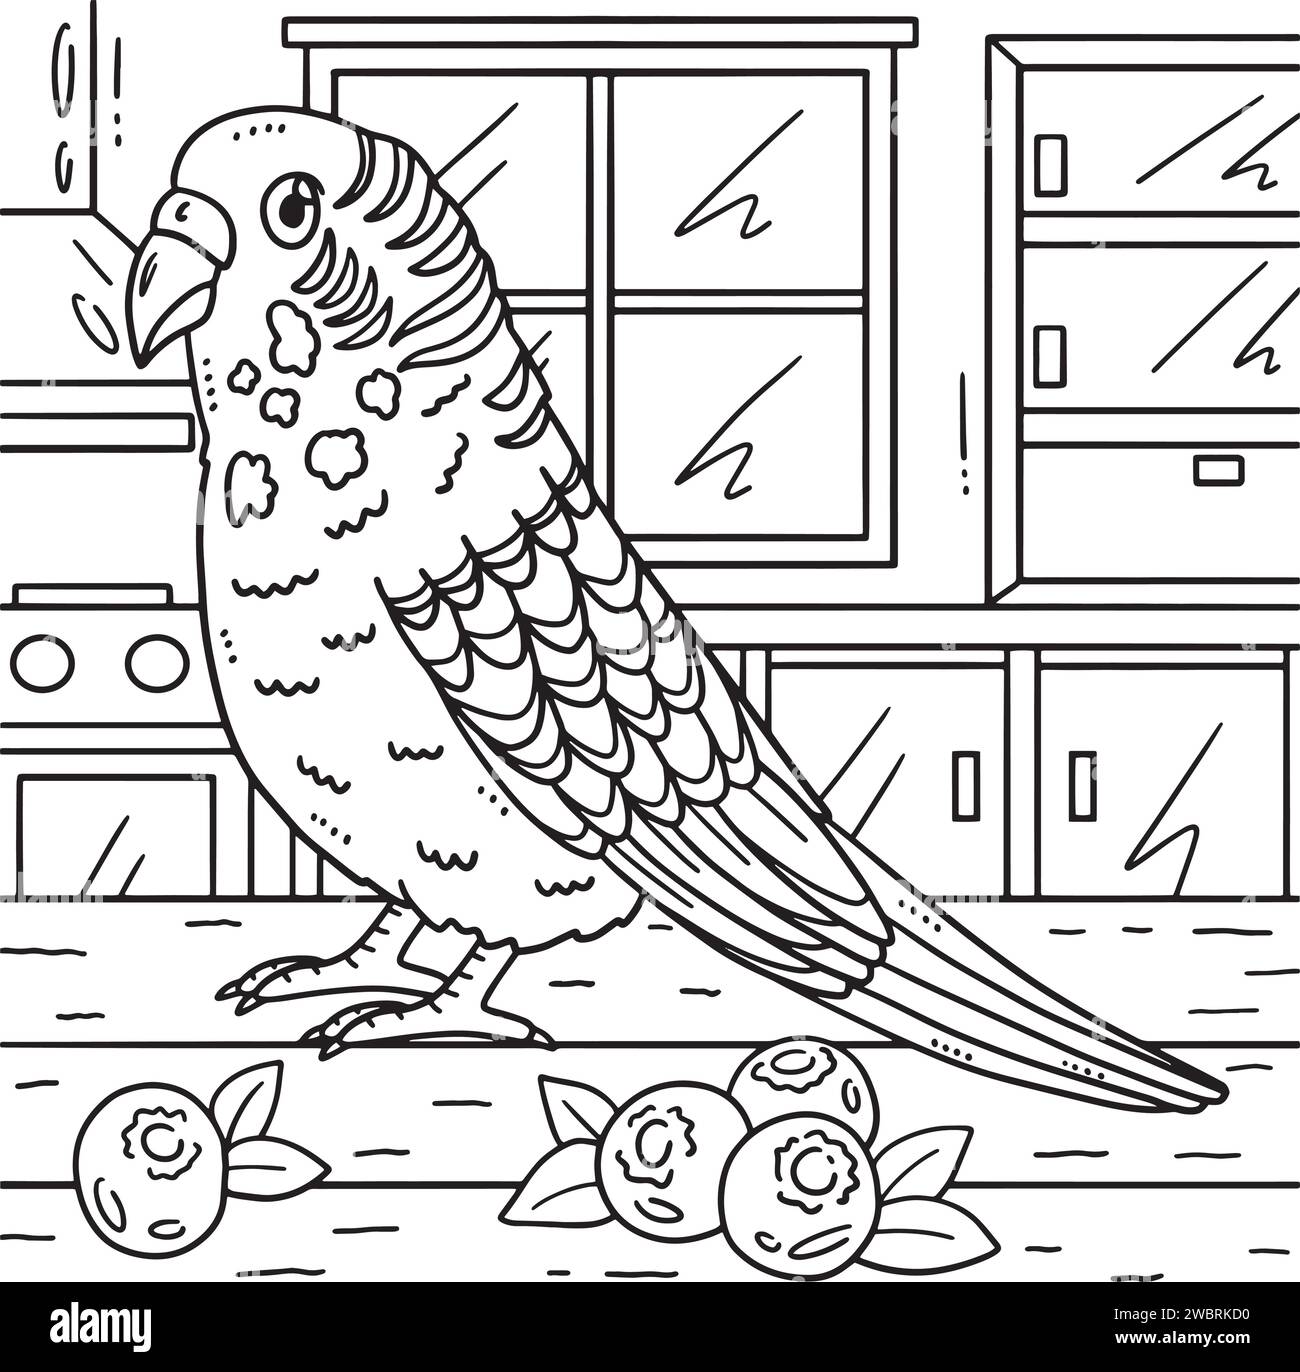 Parakeet Bird Coloring Page for Kids Stock Vector